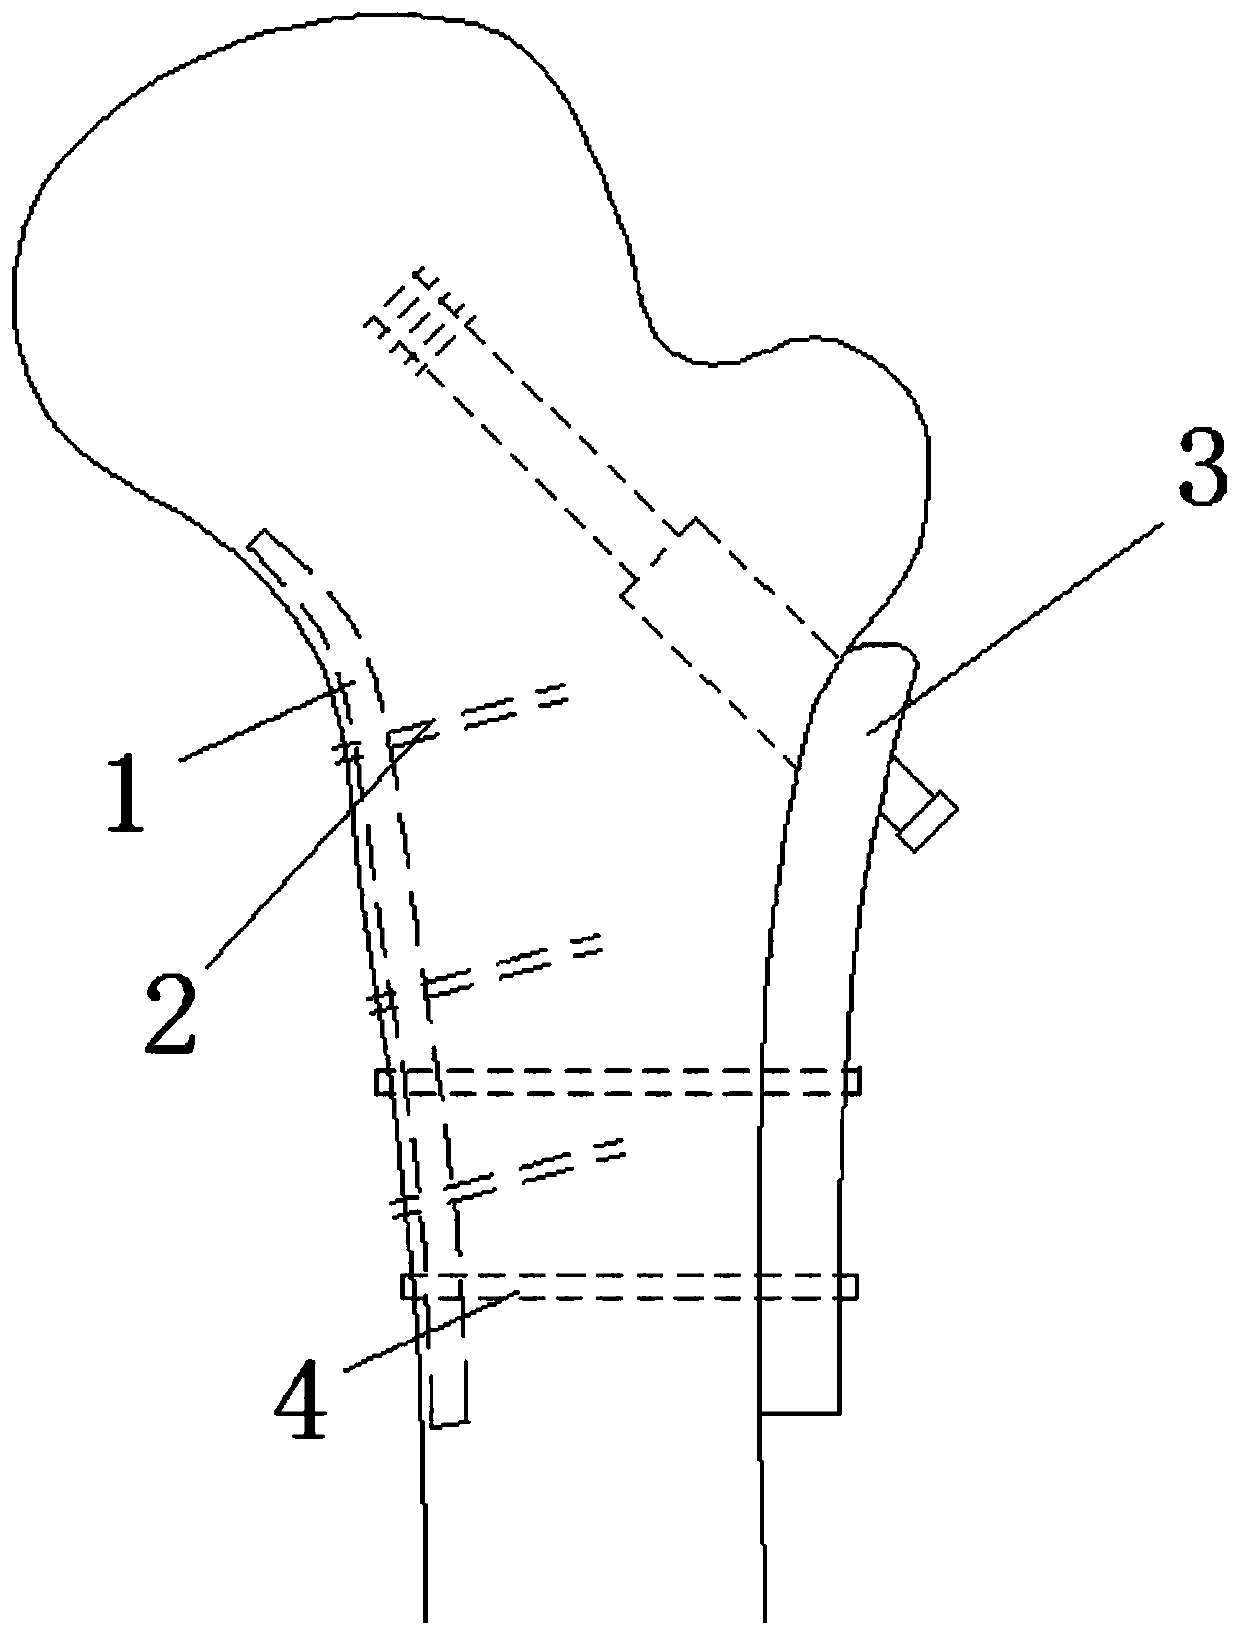 Inside support structure for medullary cavity suitable for strengthening internal fixation for proximal femoral fracture